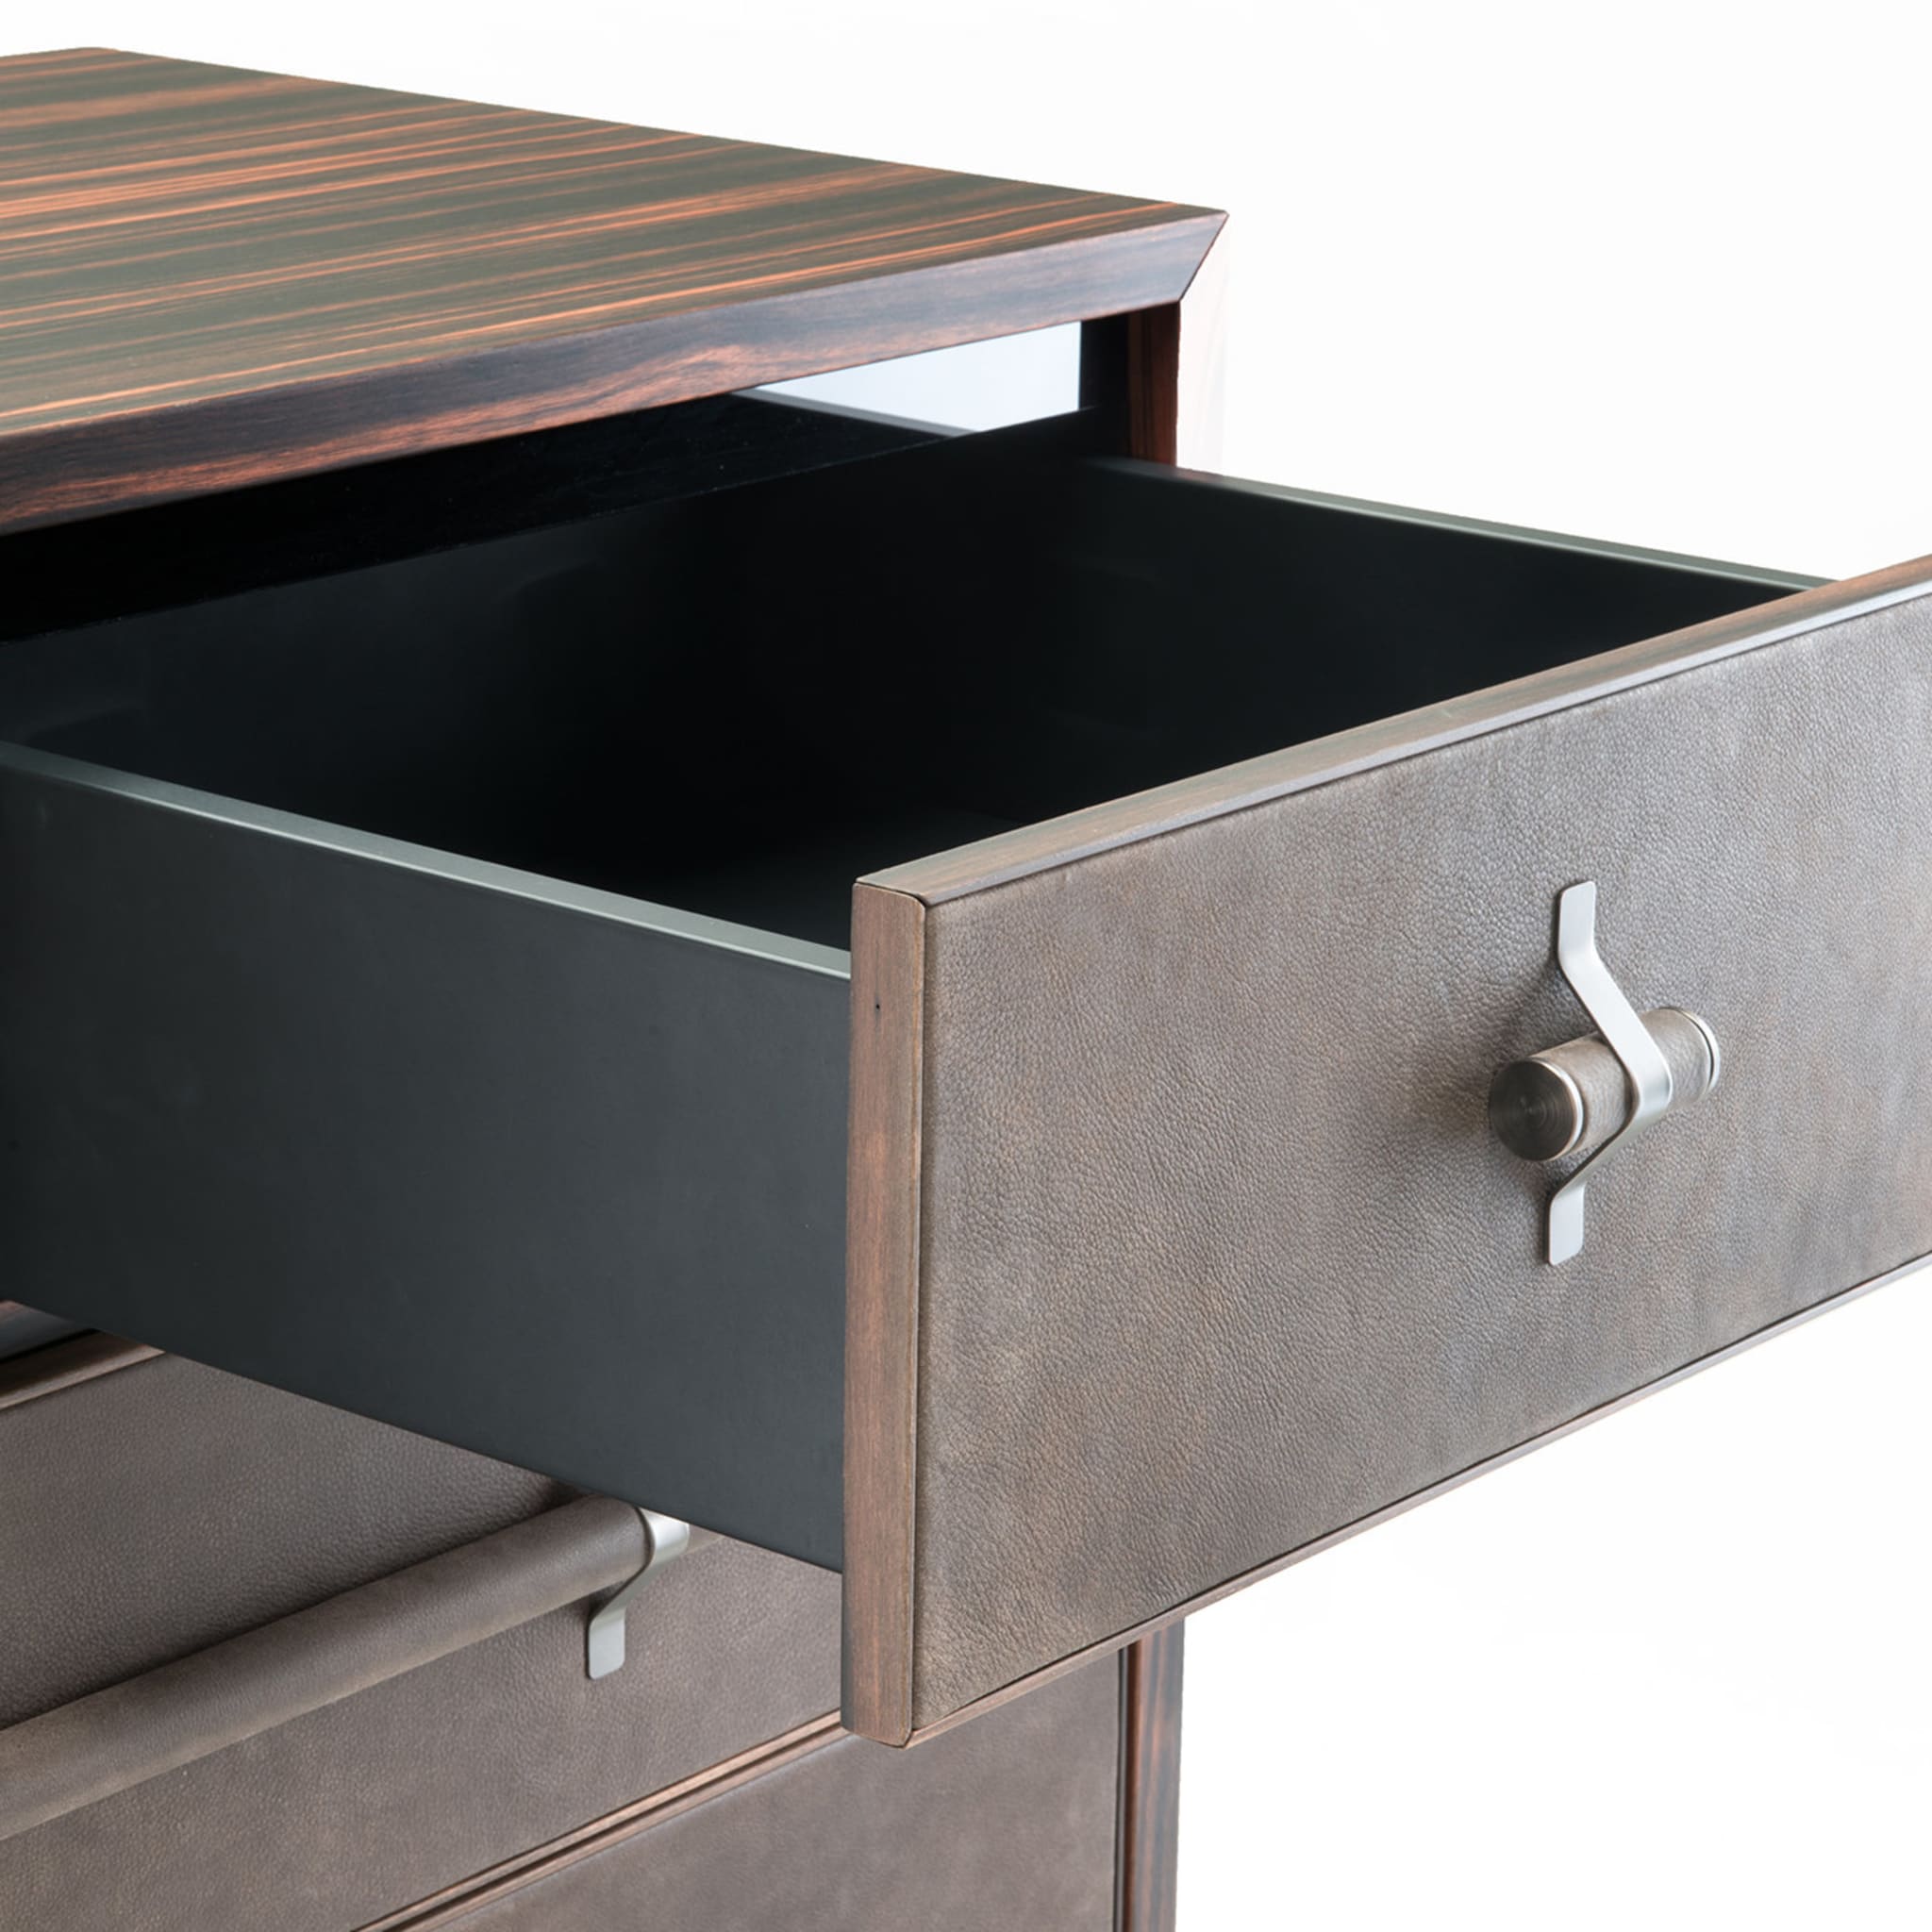 Settimo Ebony Chest of Drawers by Michael Schoeller - Alternative view 5